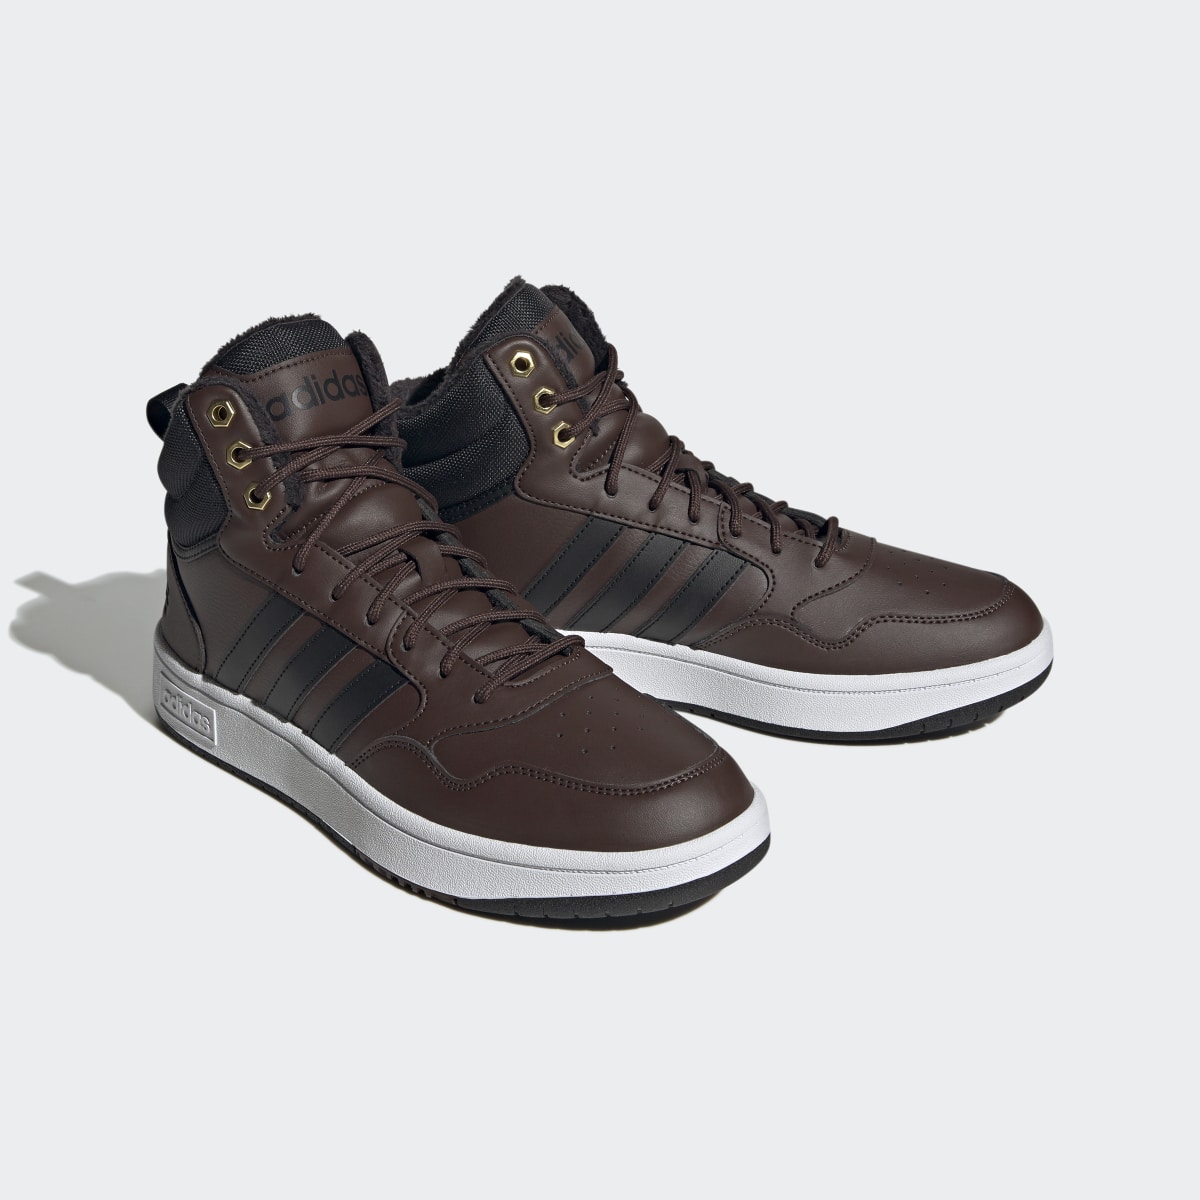 Adidas Hoops 3.0 Mid Lifestyle Basketball Classic Fur Lining Winterized Schuh. 5